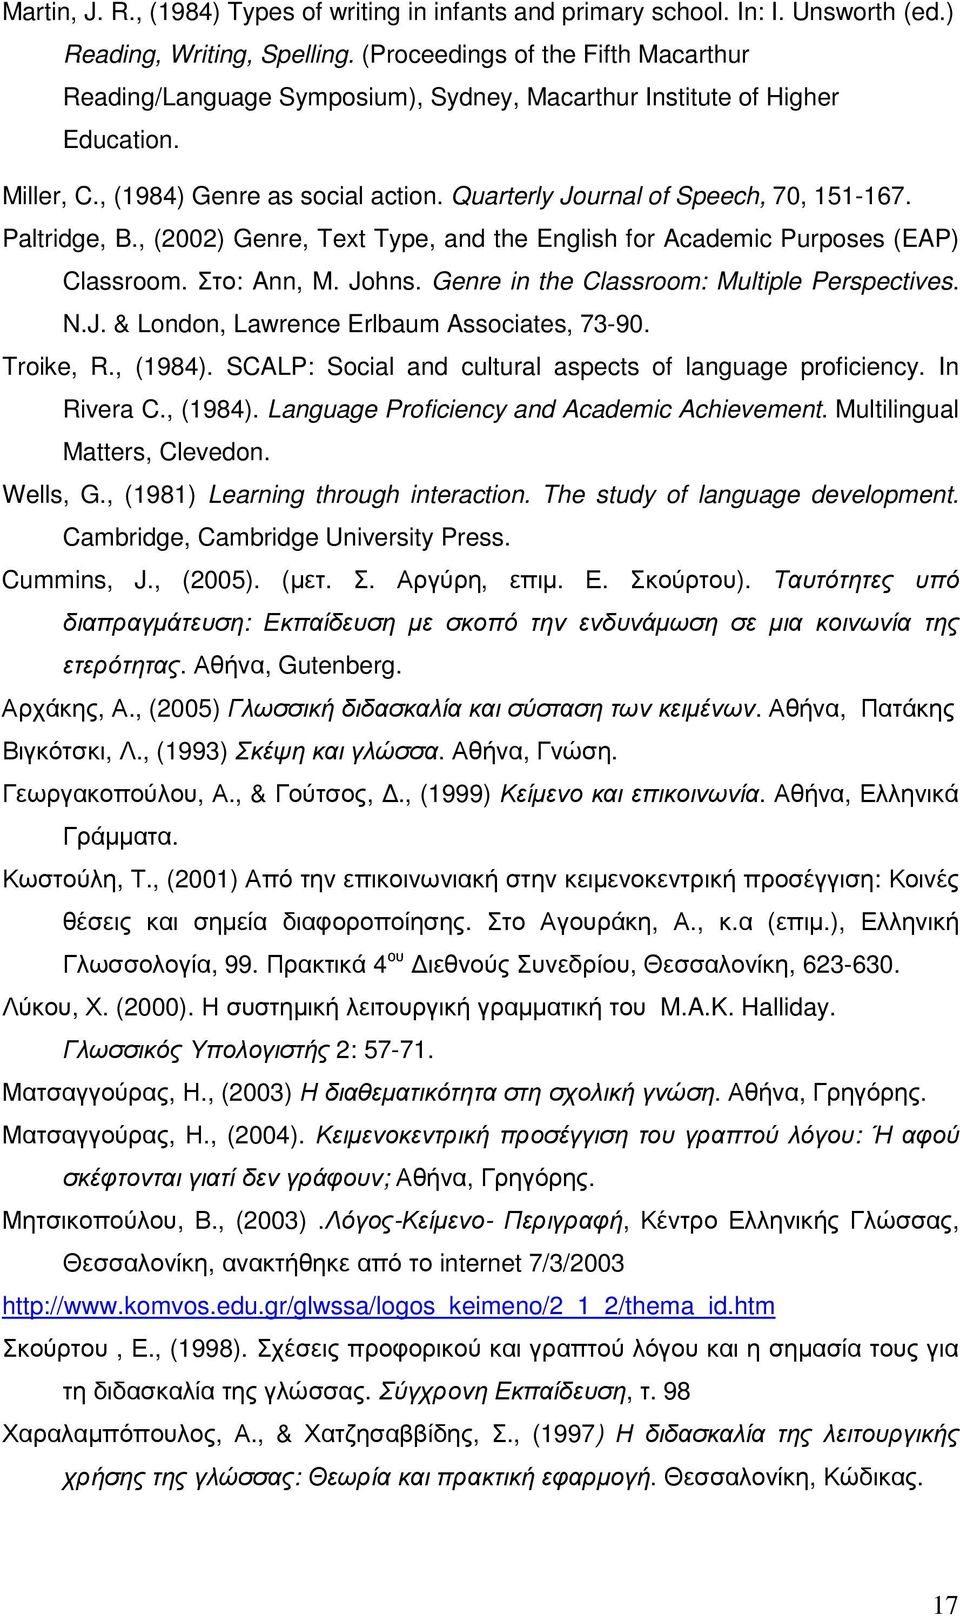 Paltridge, B., (2002) Genre, Text Type, and the English for Academic Purposes (EAP) Classroom. Στο: Ann, M. Johns. Genre in the Classroom: Multiple Perspectives. N.J. & London, Lawrence Erlbaum Associates, 73-90.